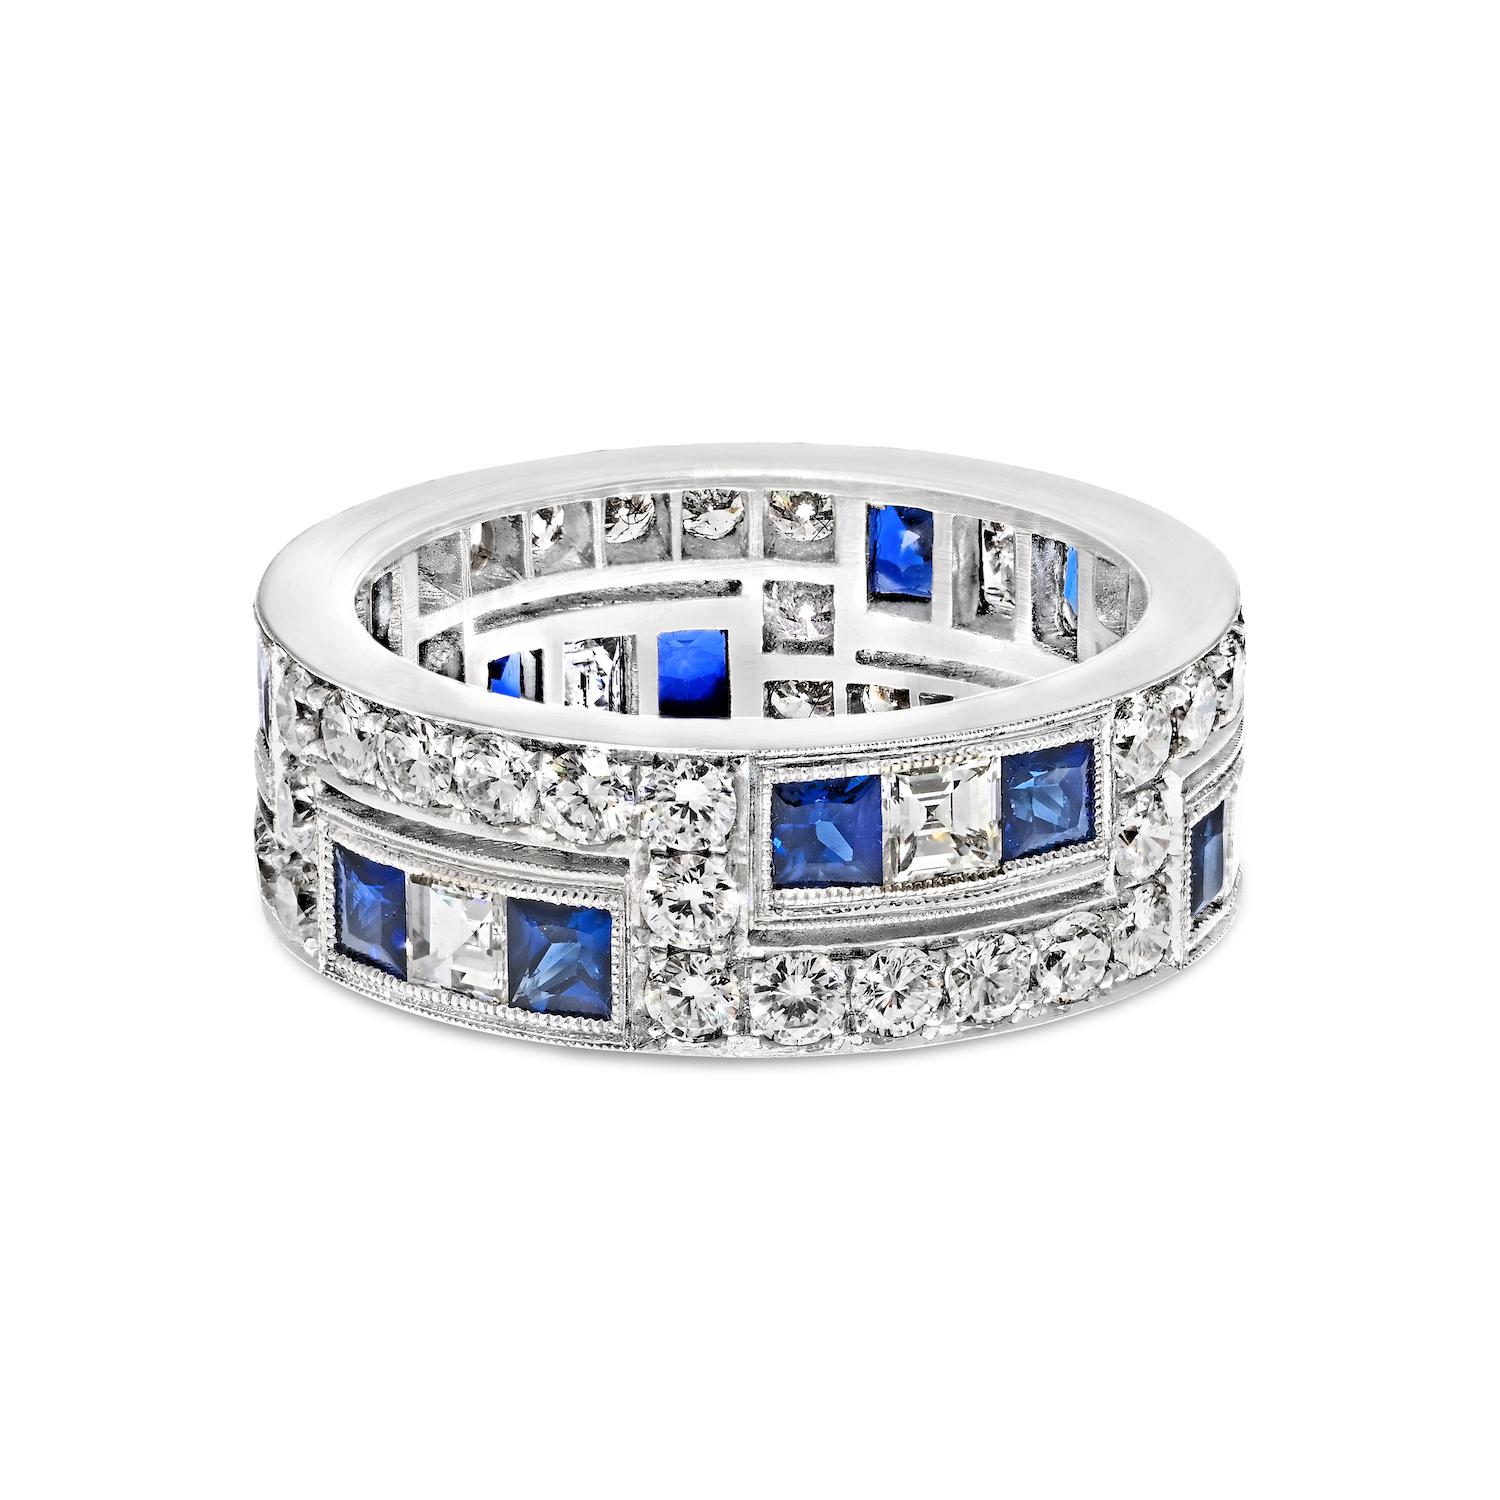 Our workshop is proud to offer a stunning custom-made eternity ring that is crafted from the finest materials.

This exquisite ring is made from platinum and features a dazzling array of diamonds and sapphires.

The band itself is predominantly made